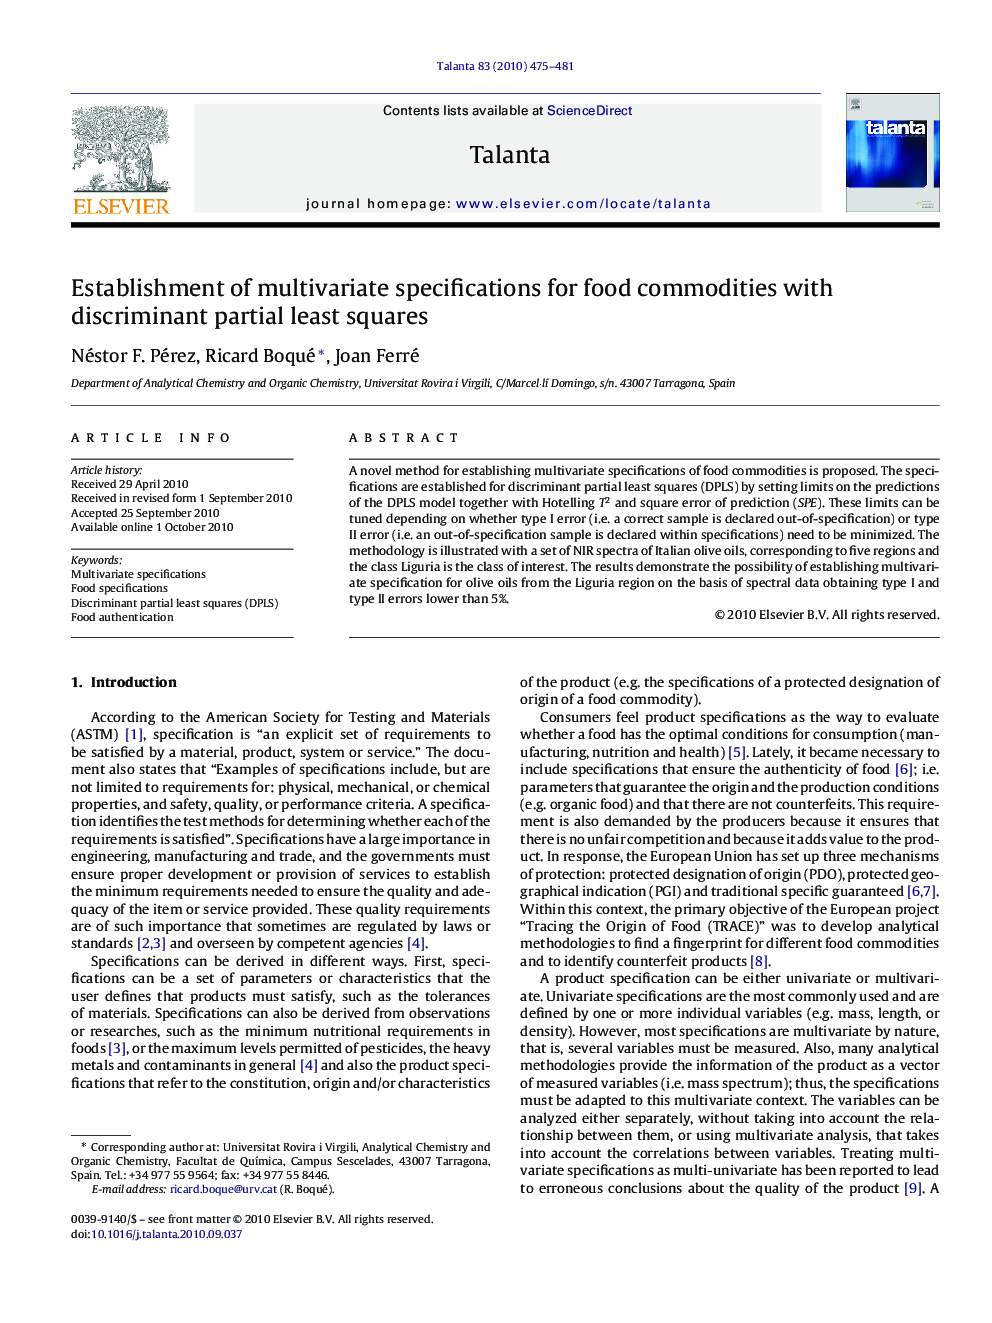 Establishment of multivariate specifications for food commodities with discriminant partial least squares